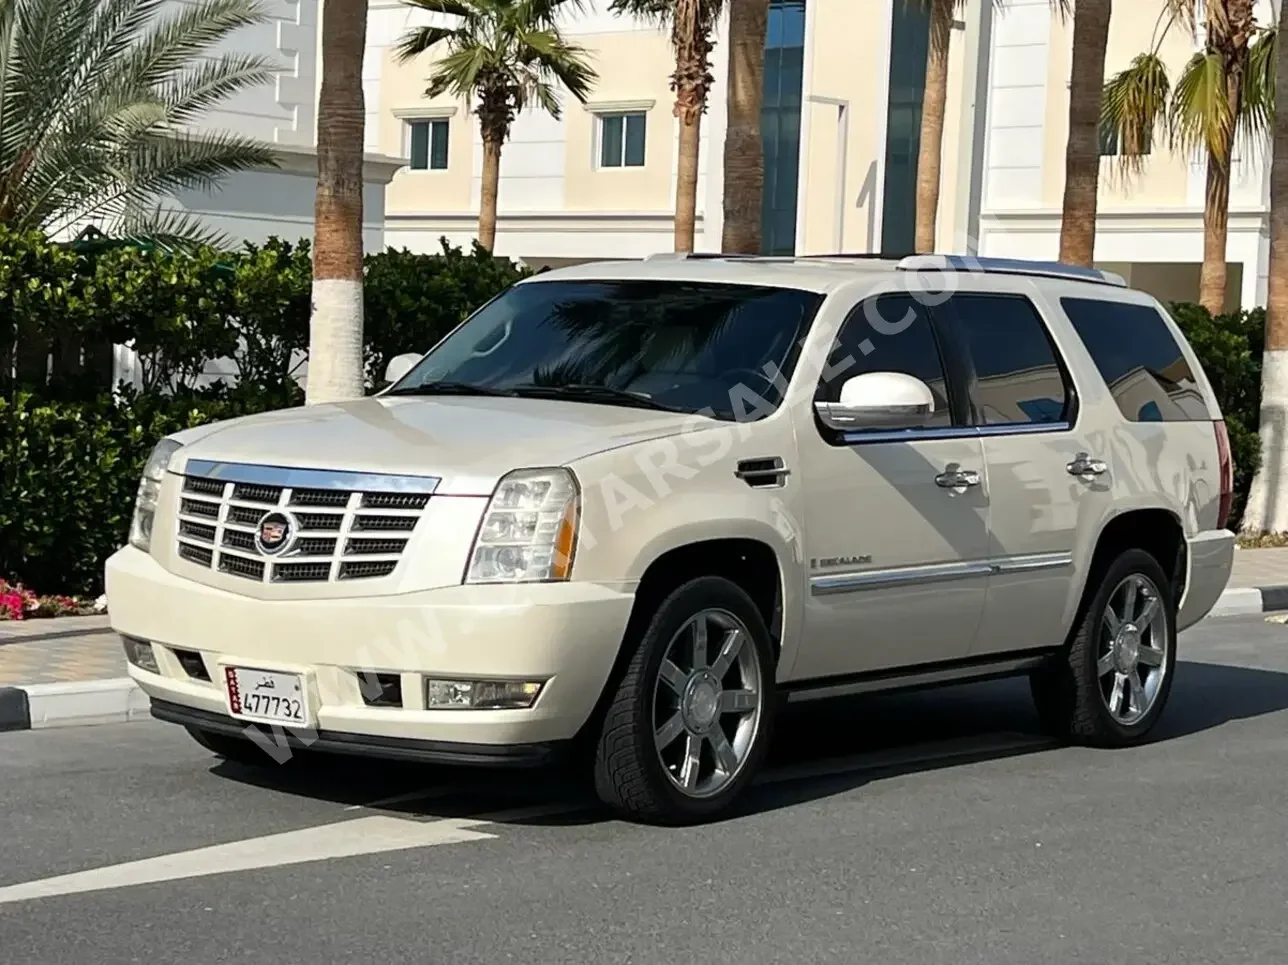 Cadillac  Escalade  2007  Automatic  306,000 Km  8 Cylinder  Four Wheel Drive (4WD)  SUV  White